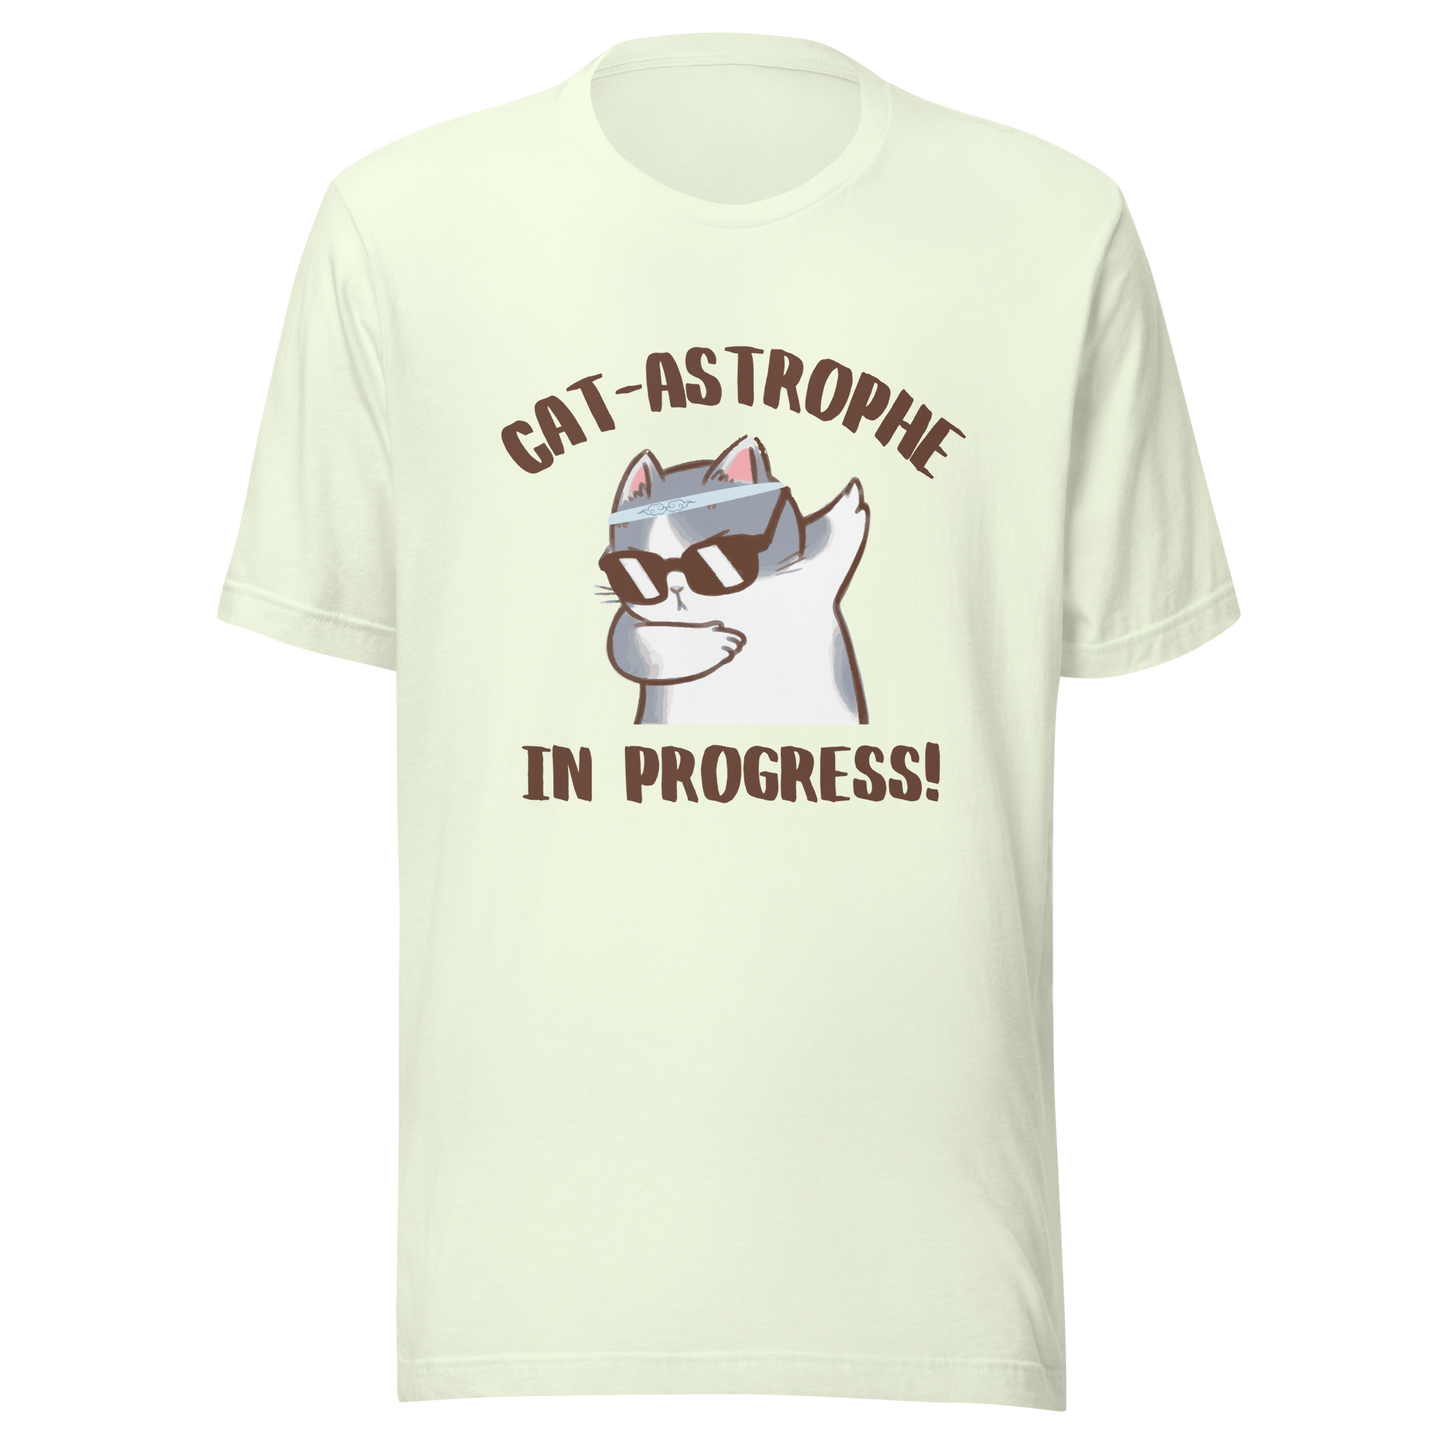 Unisex T-Shirt 'Cat-astrophe in Progress!' - A Playful and Whimsical Design for Cat Lovers